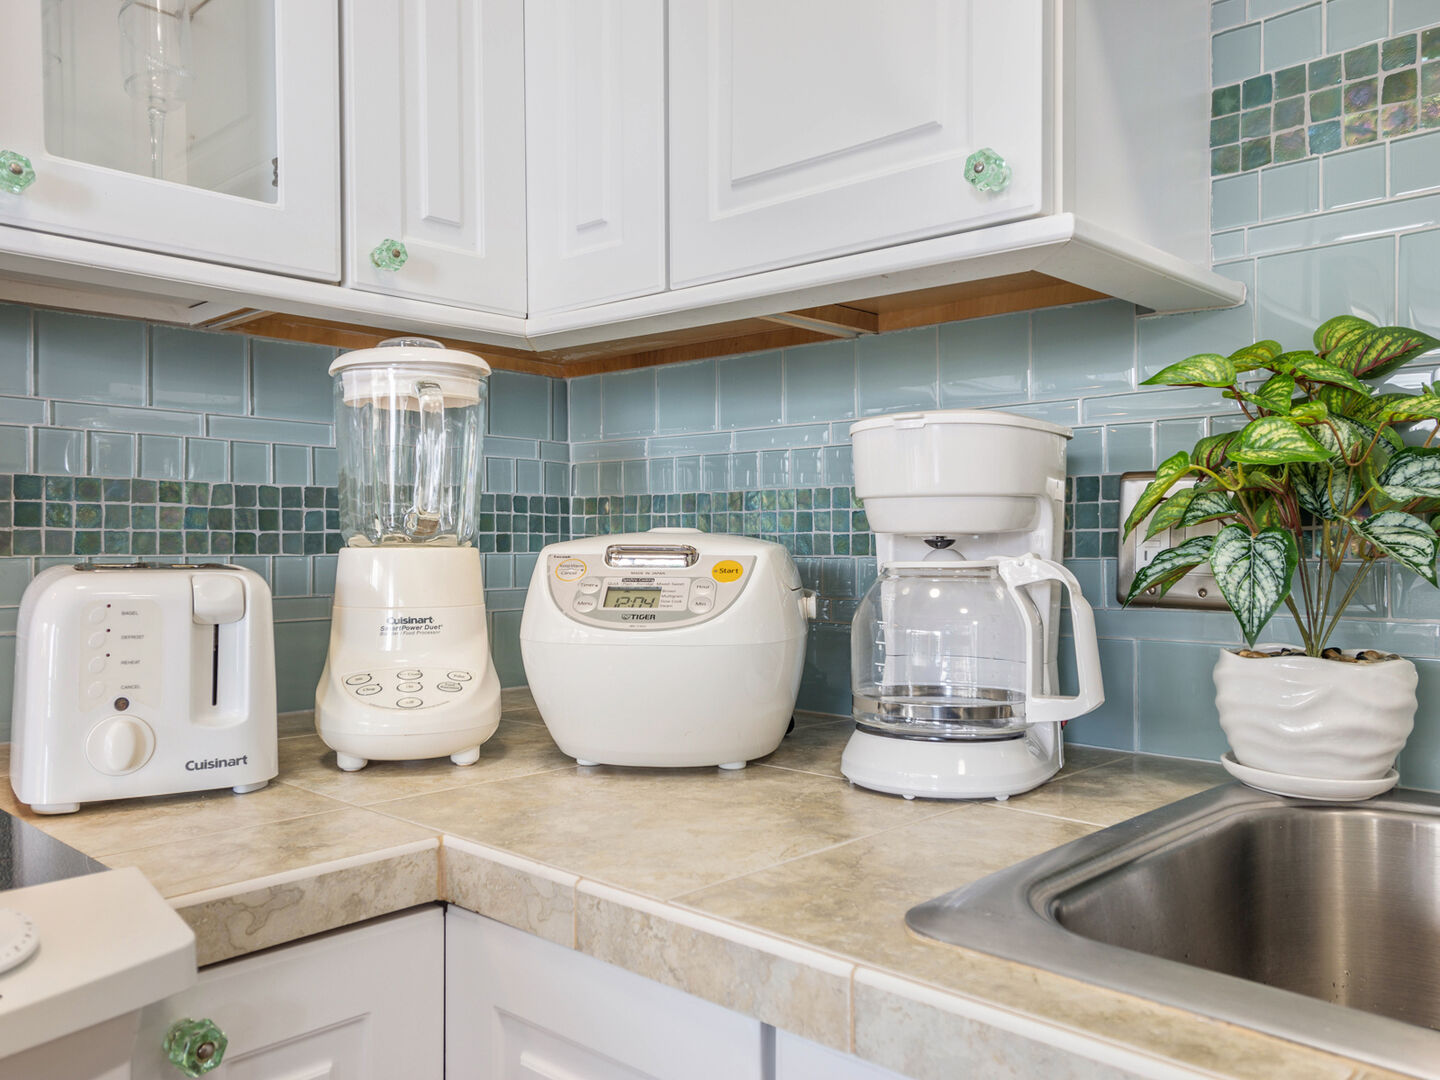 Fully equipped kitchen with coffee maker, toaster, kettle, blender and rice cooker